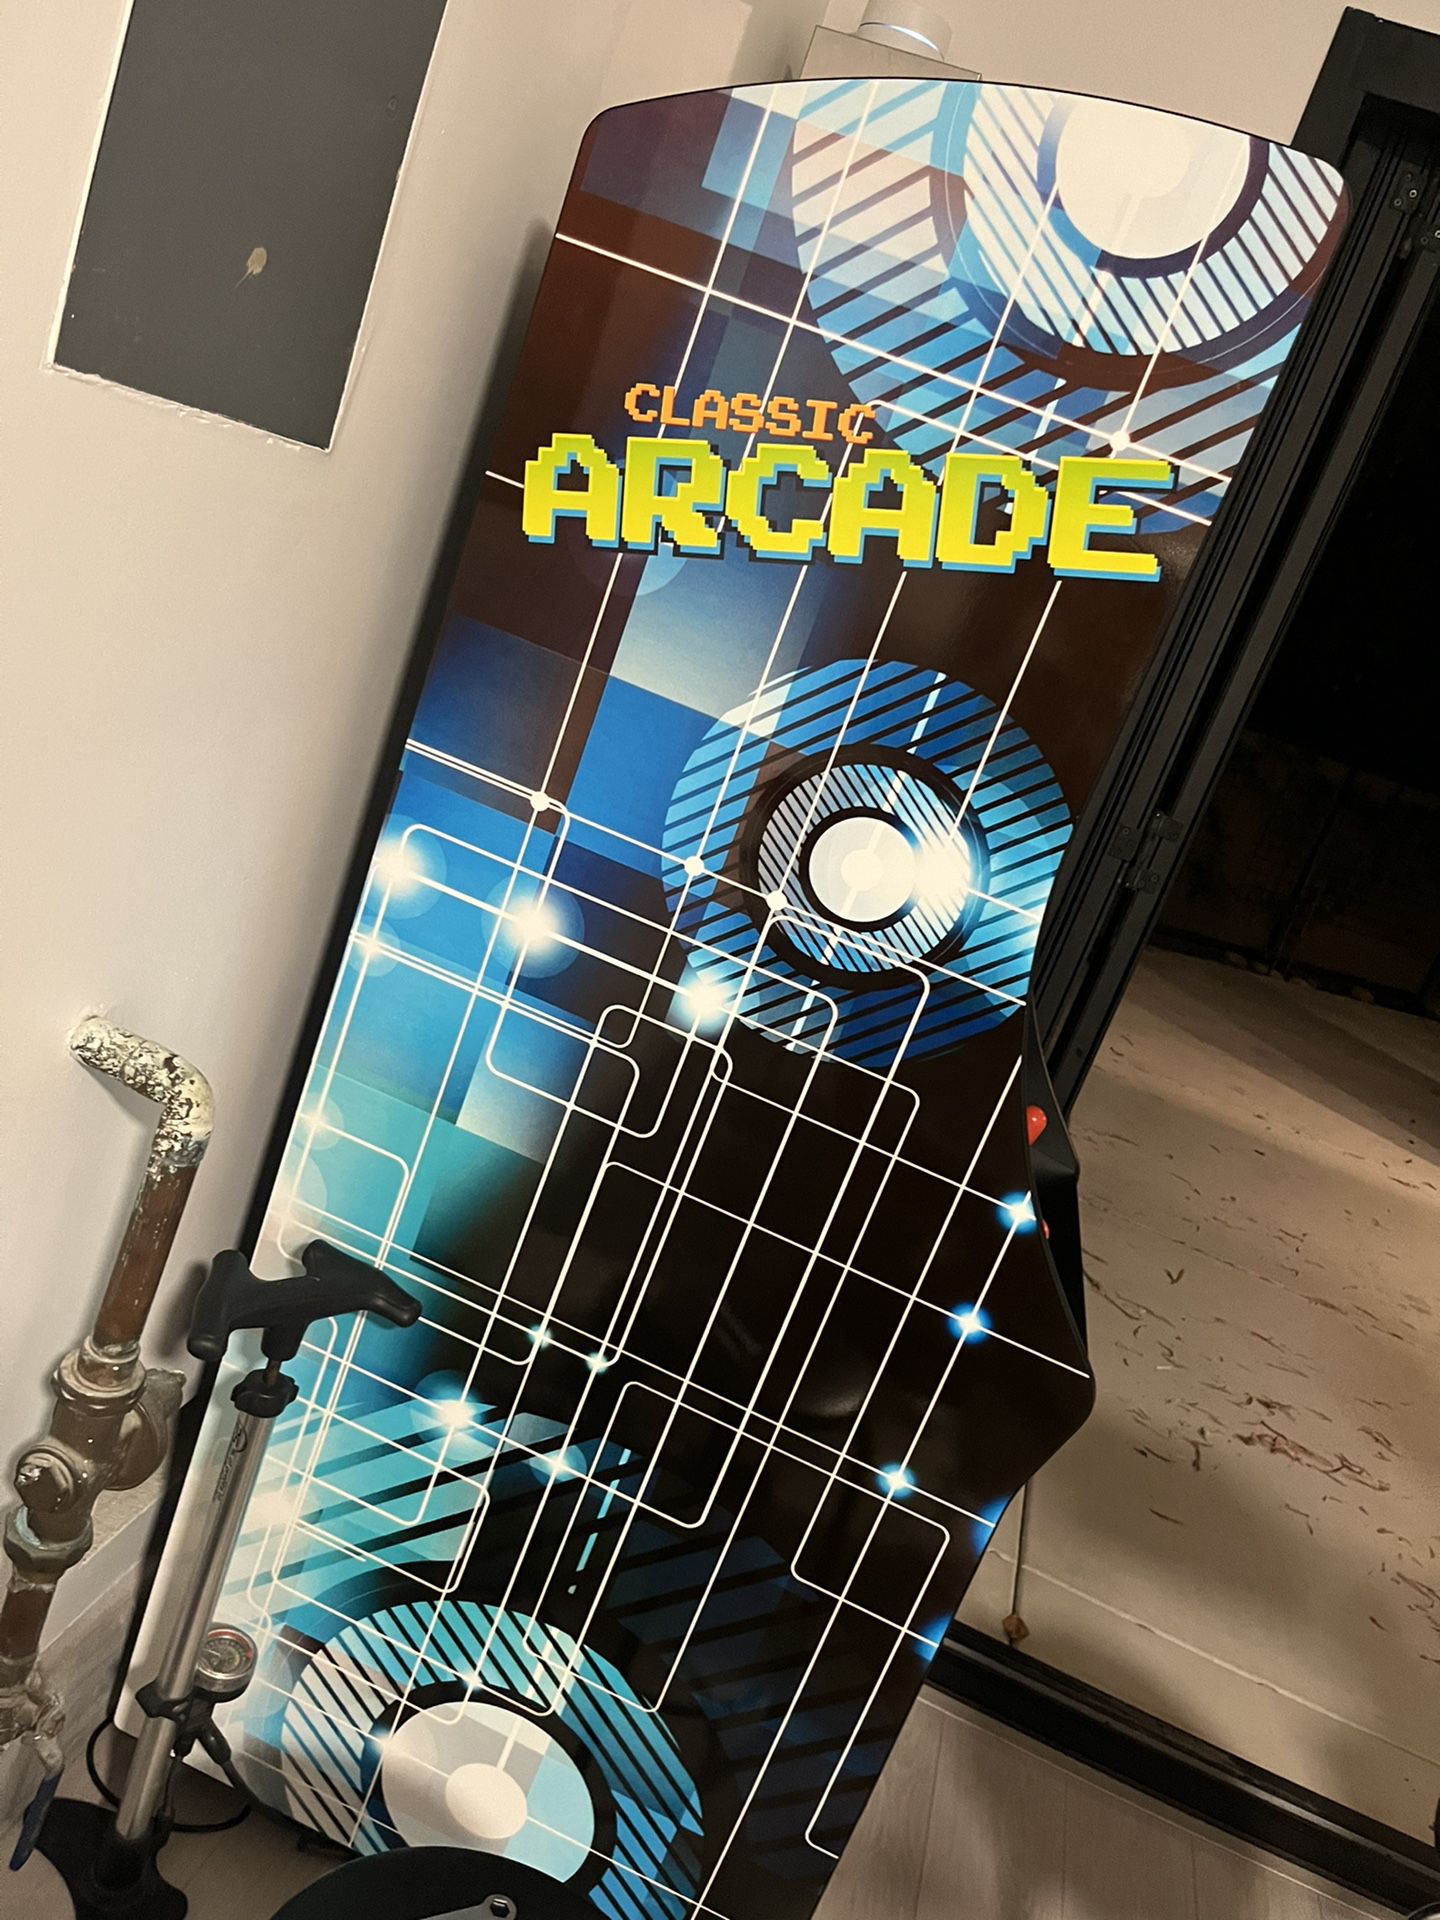 Full-Sized Upright Arcade Game with 60 Classic Games with Trackball